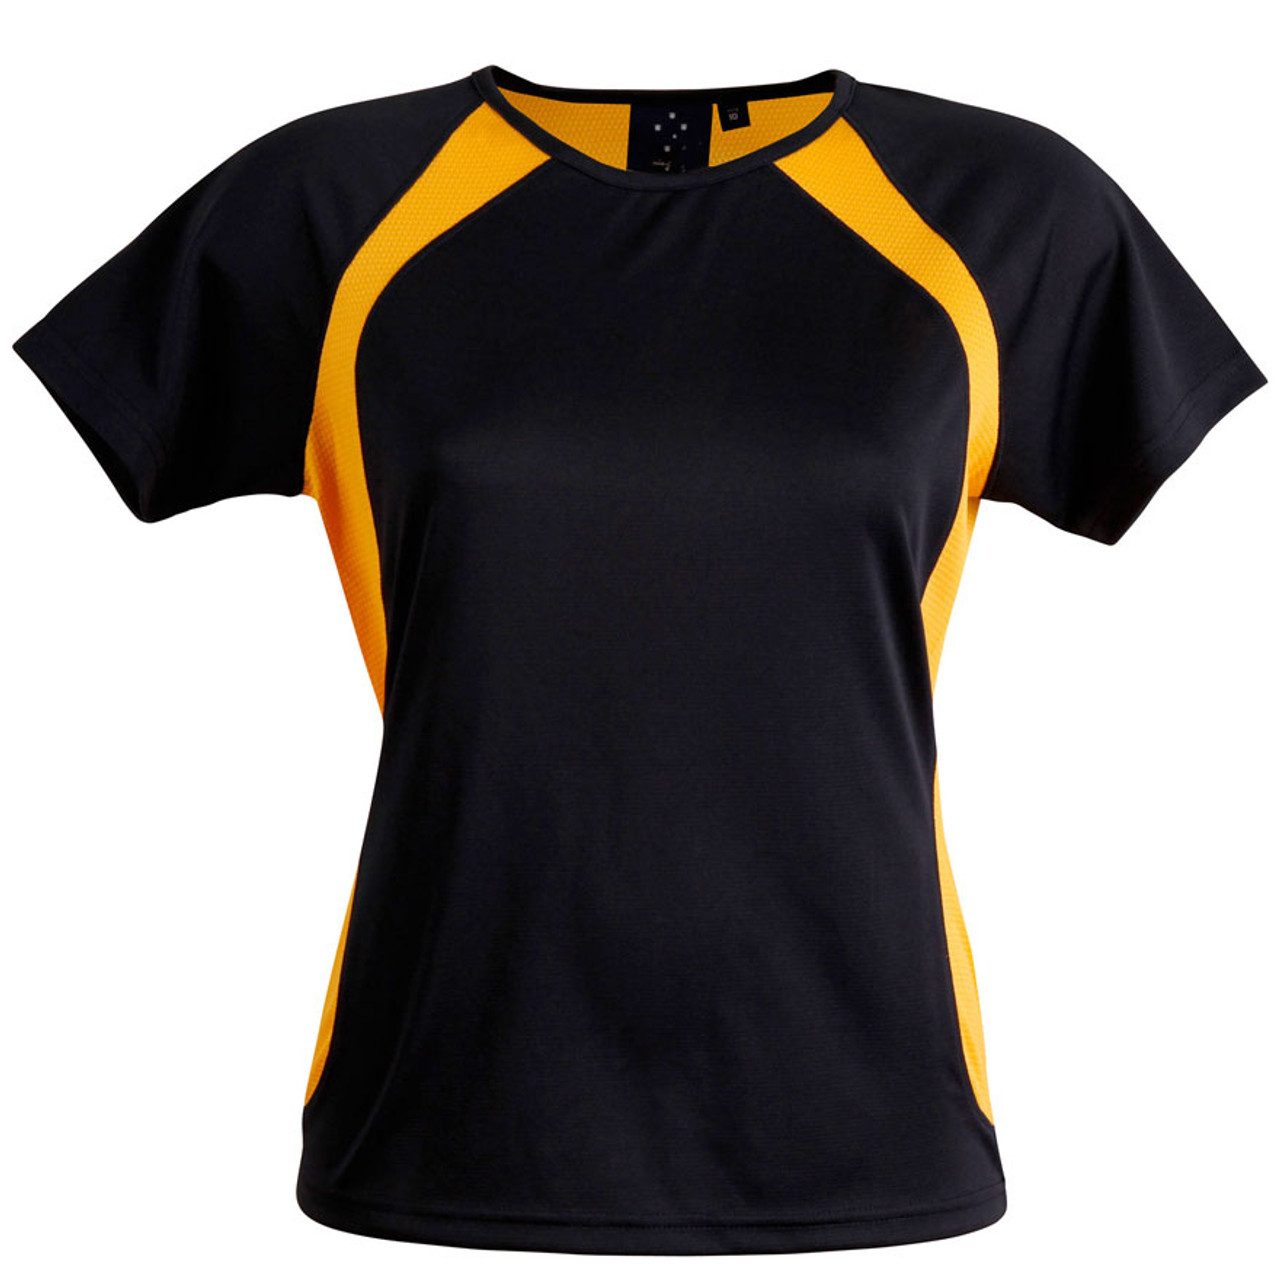 COURAGE | ladies cooldry tshirt | mesh panels | athletic sports wear ...